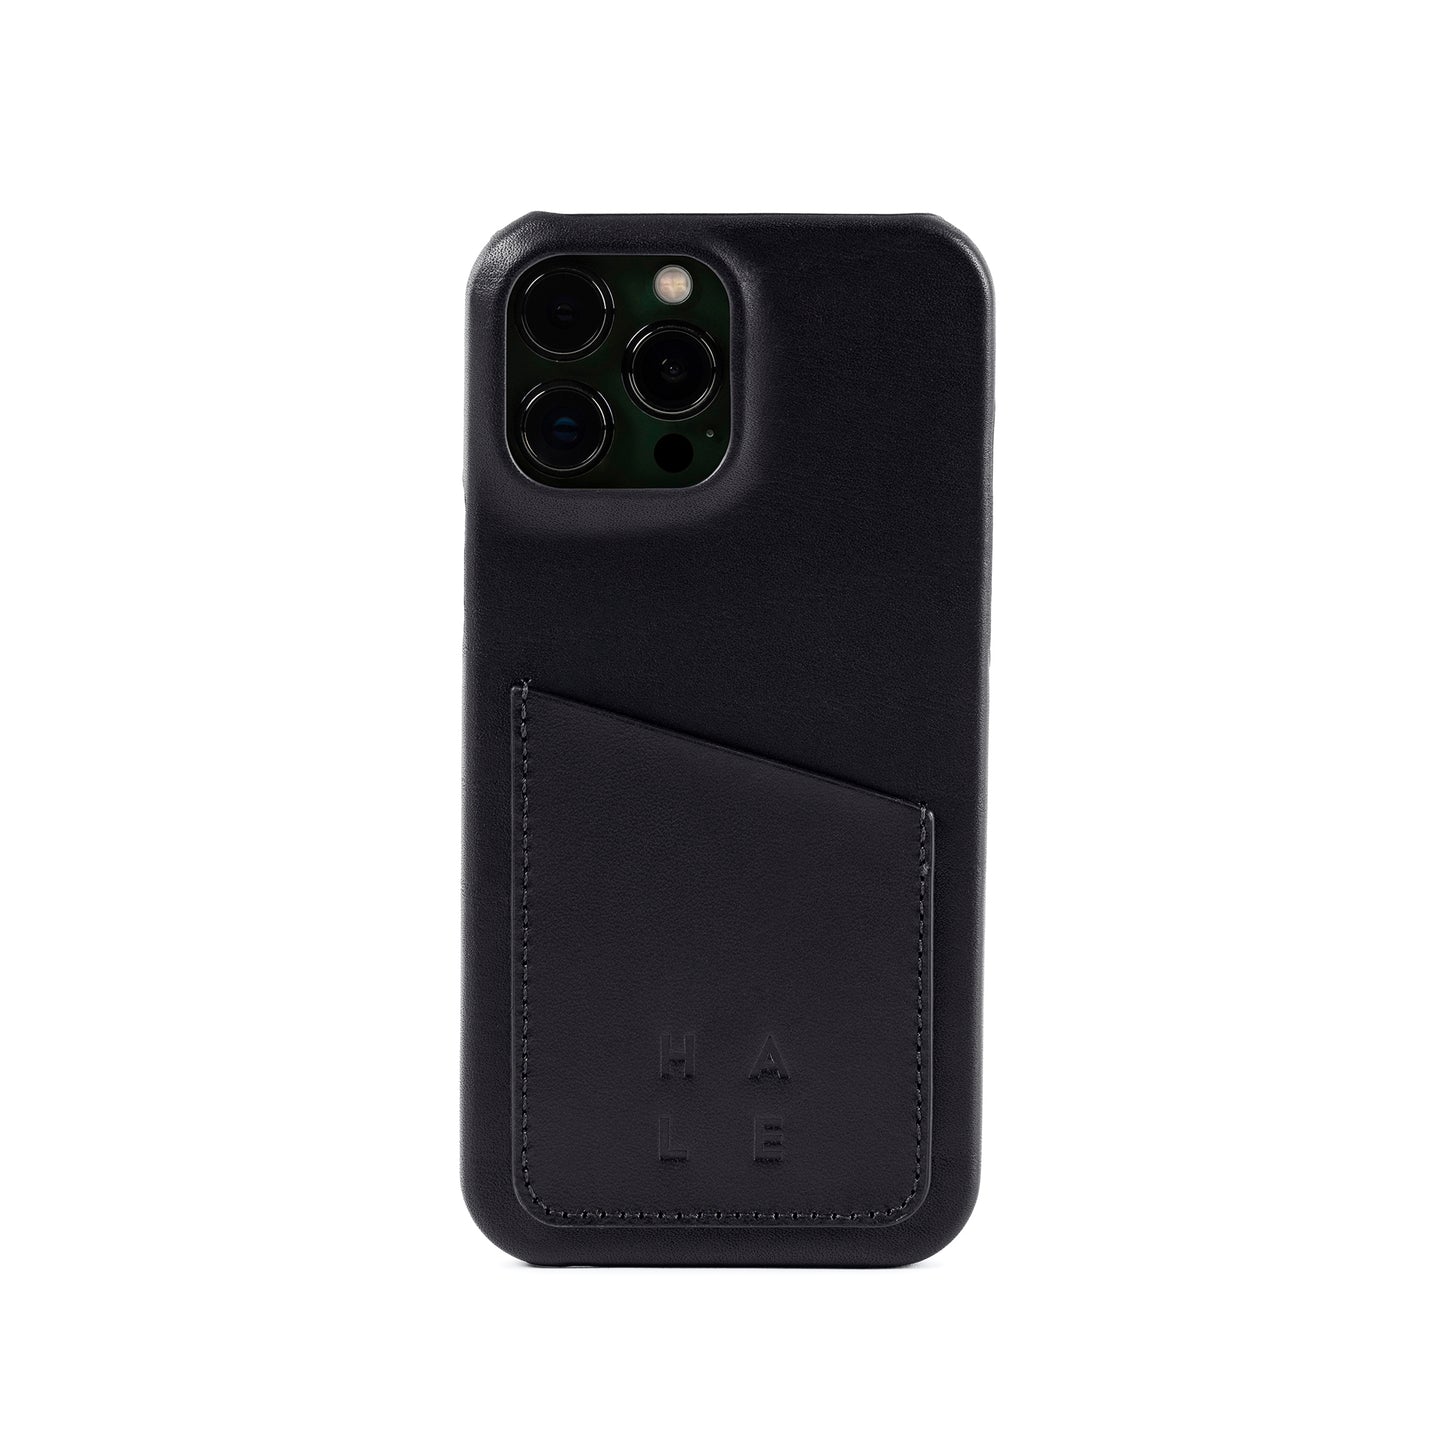 HISHULT IPhone wallet case 13 Pro Max Black